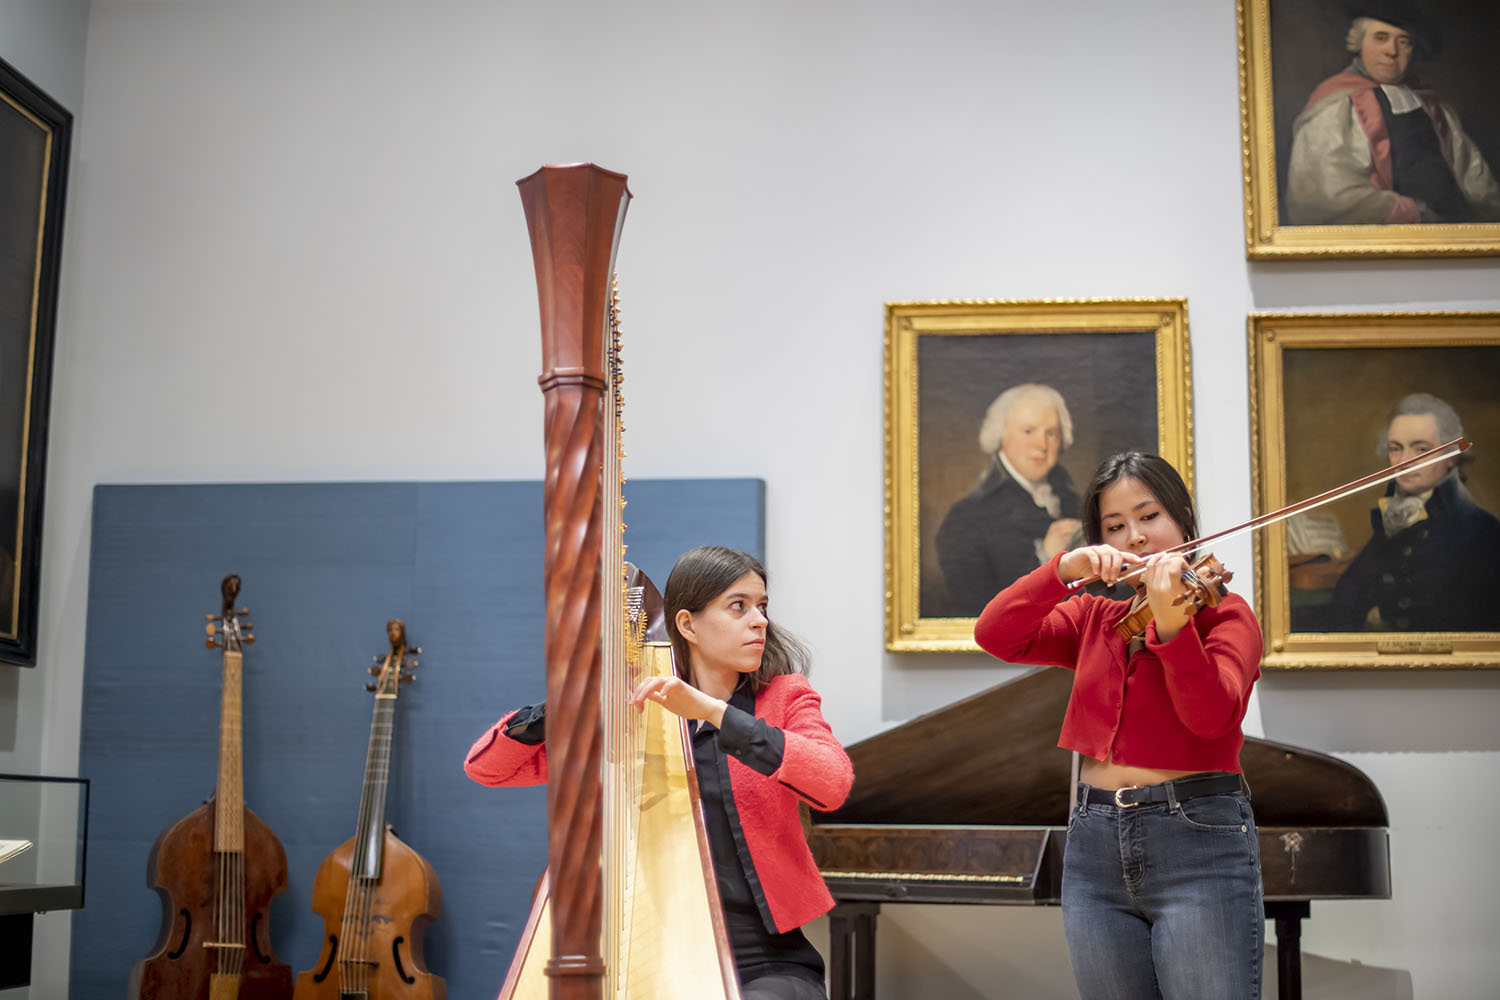 A violinist and a harpist performing against a backdrop of paintings and old instruments in the Royal College of Music Museum